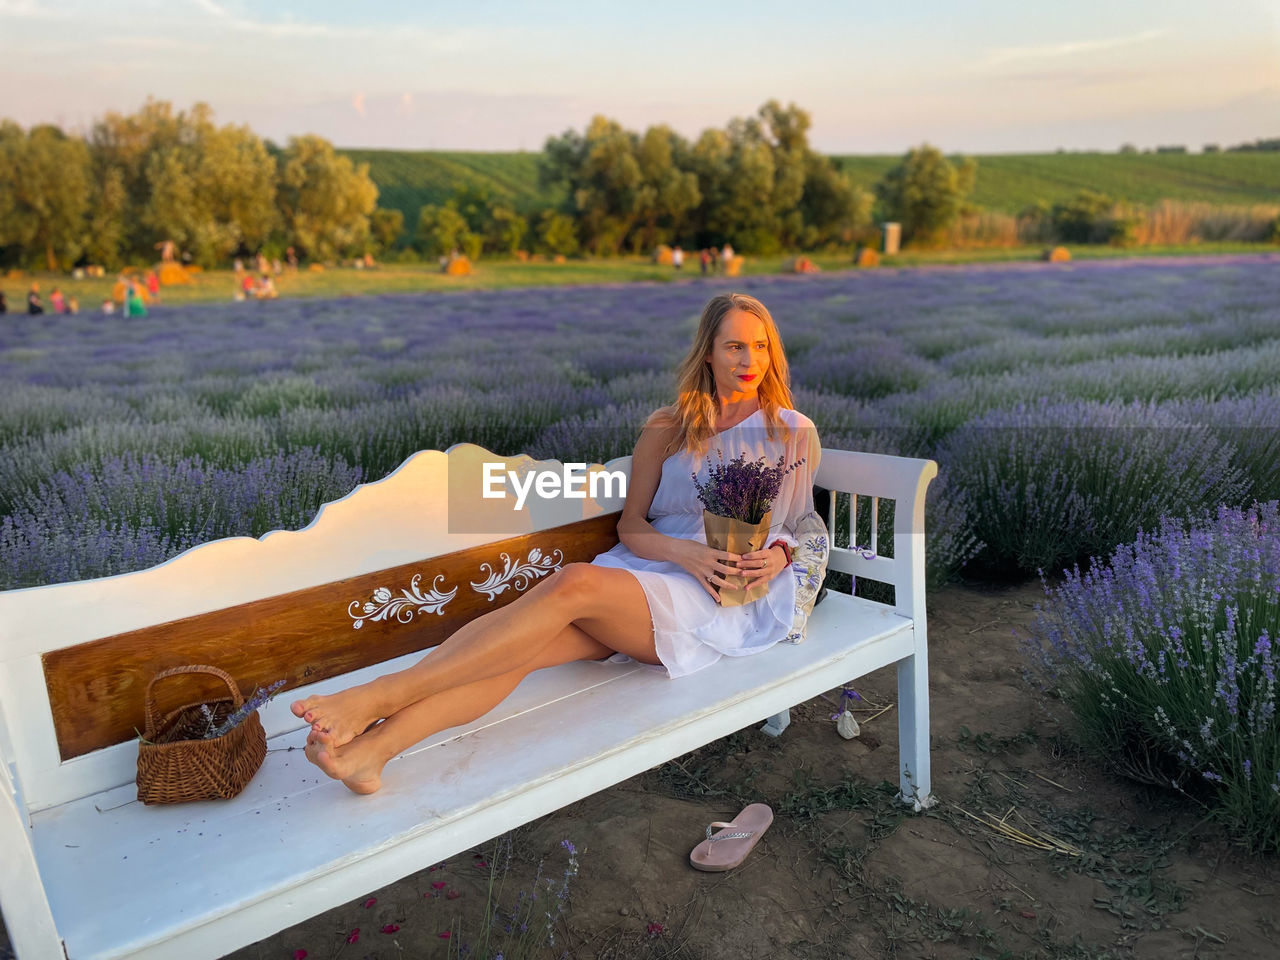 Blonde woman in white dress resting on a white bench placed in a field of lavender flowers